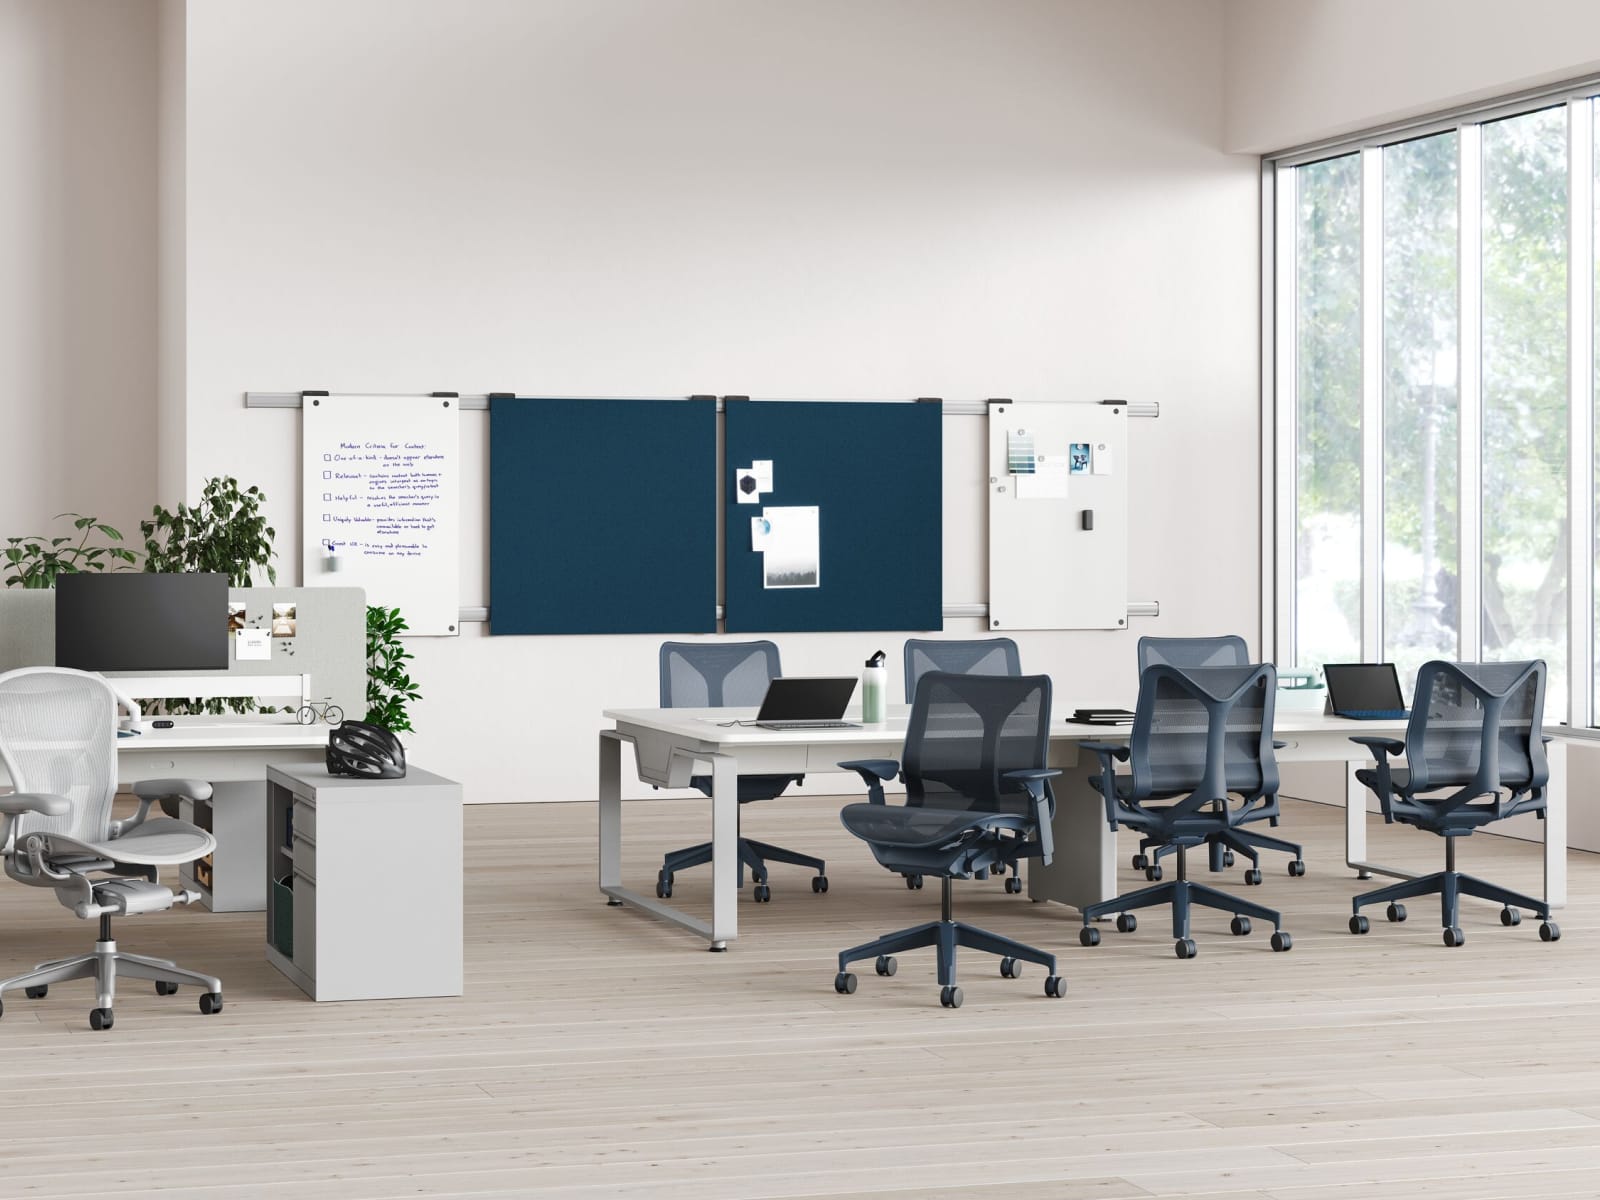 Byne System in 4- and 6-seat clusters with Arras legs, next to Aeron Chairs, Cosm Chairs and CK Storage.